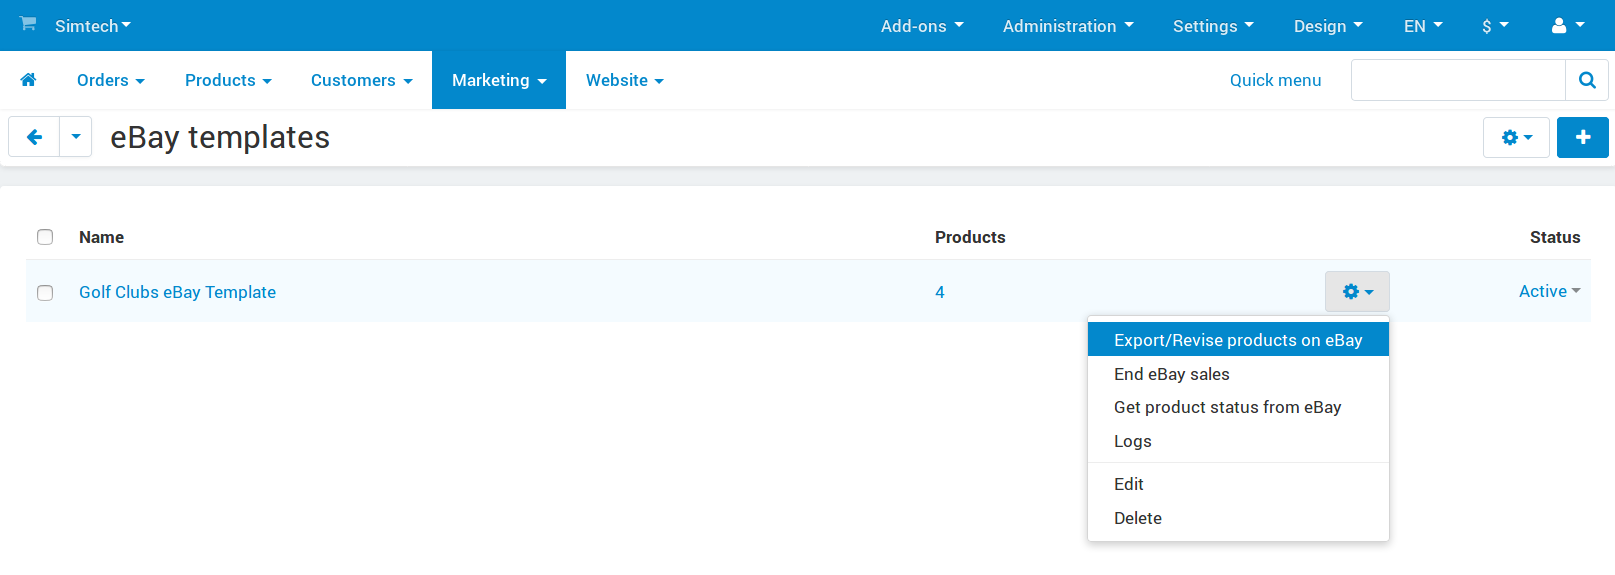 Select the template to export or revise, then click Export/Revise products on Ebay.